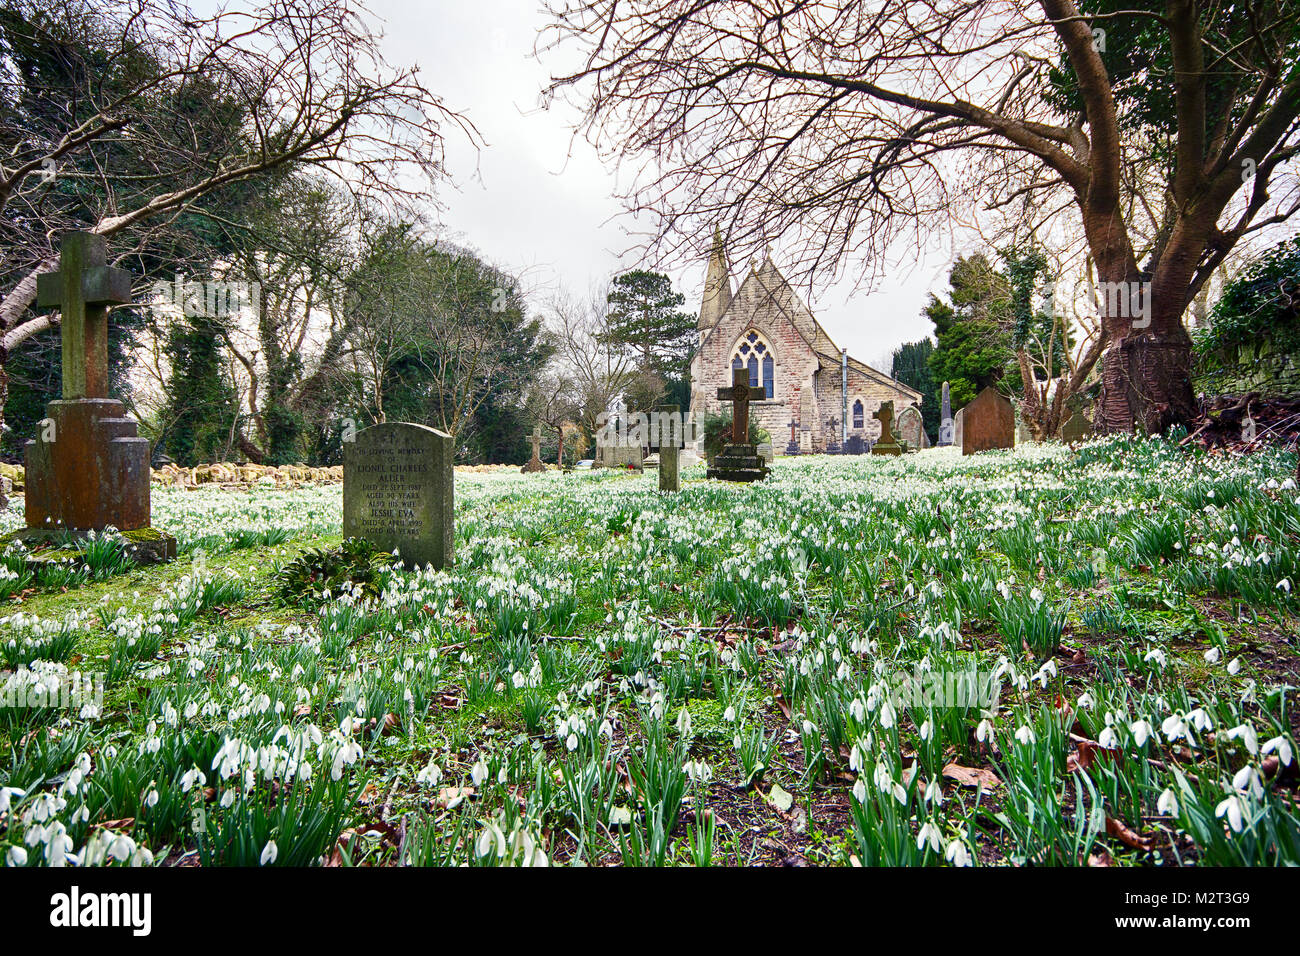 Edge, Gloucestershire, UK. 8th Feb, 2018. A carpet of snowdrops in full bloom at The Parish Church of St John the Baptist in Edge near Stroud, Gloucestershire. Picture: Carl Hewlett/Alamy Live News Stock Photo